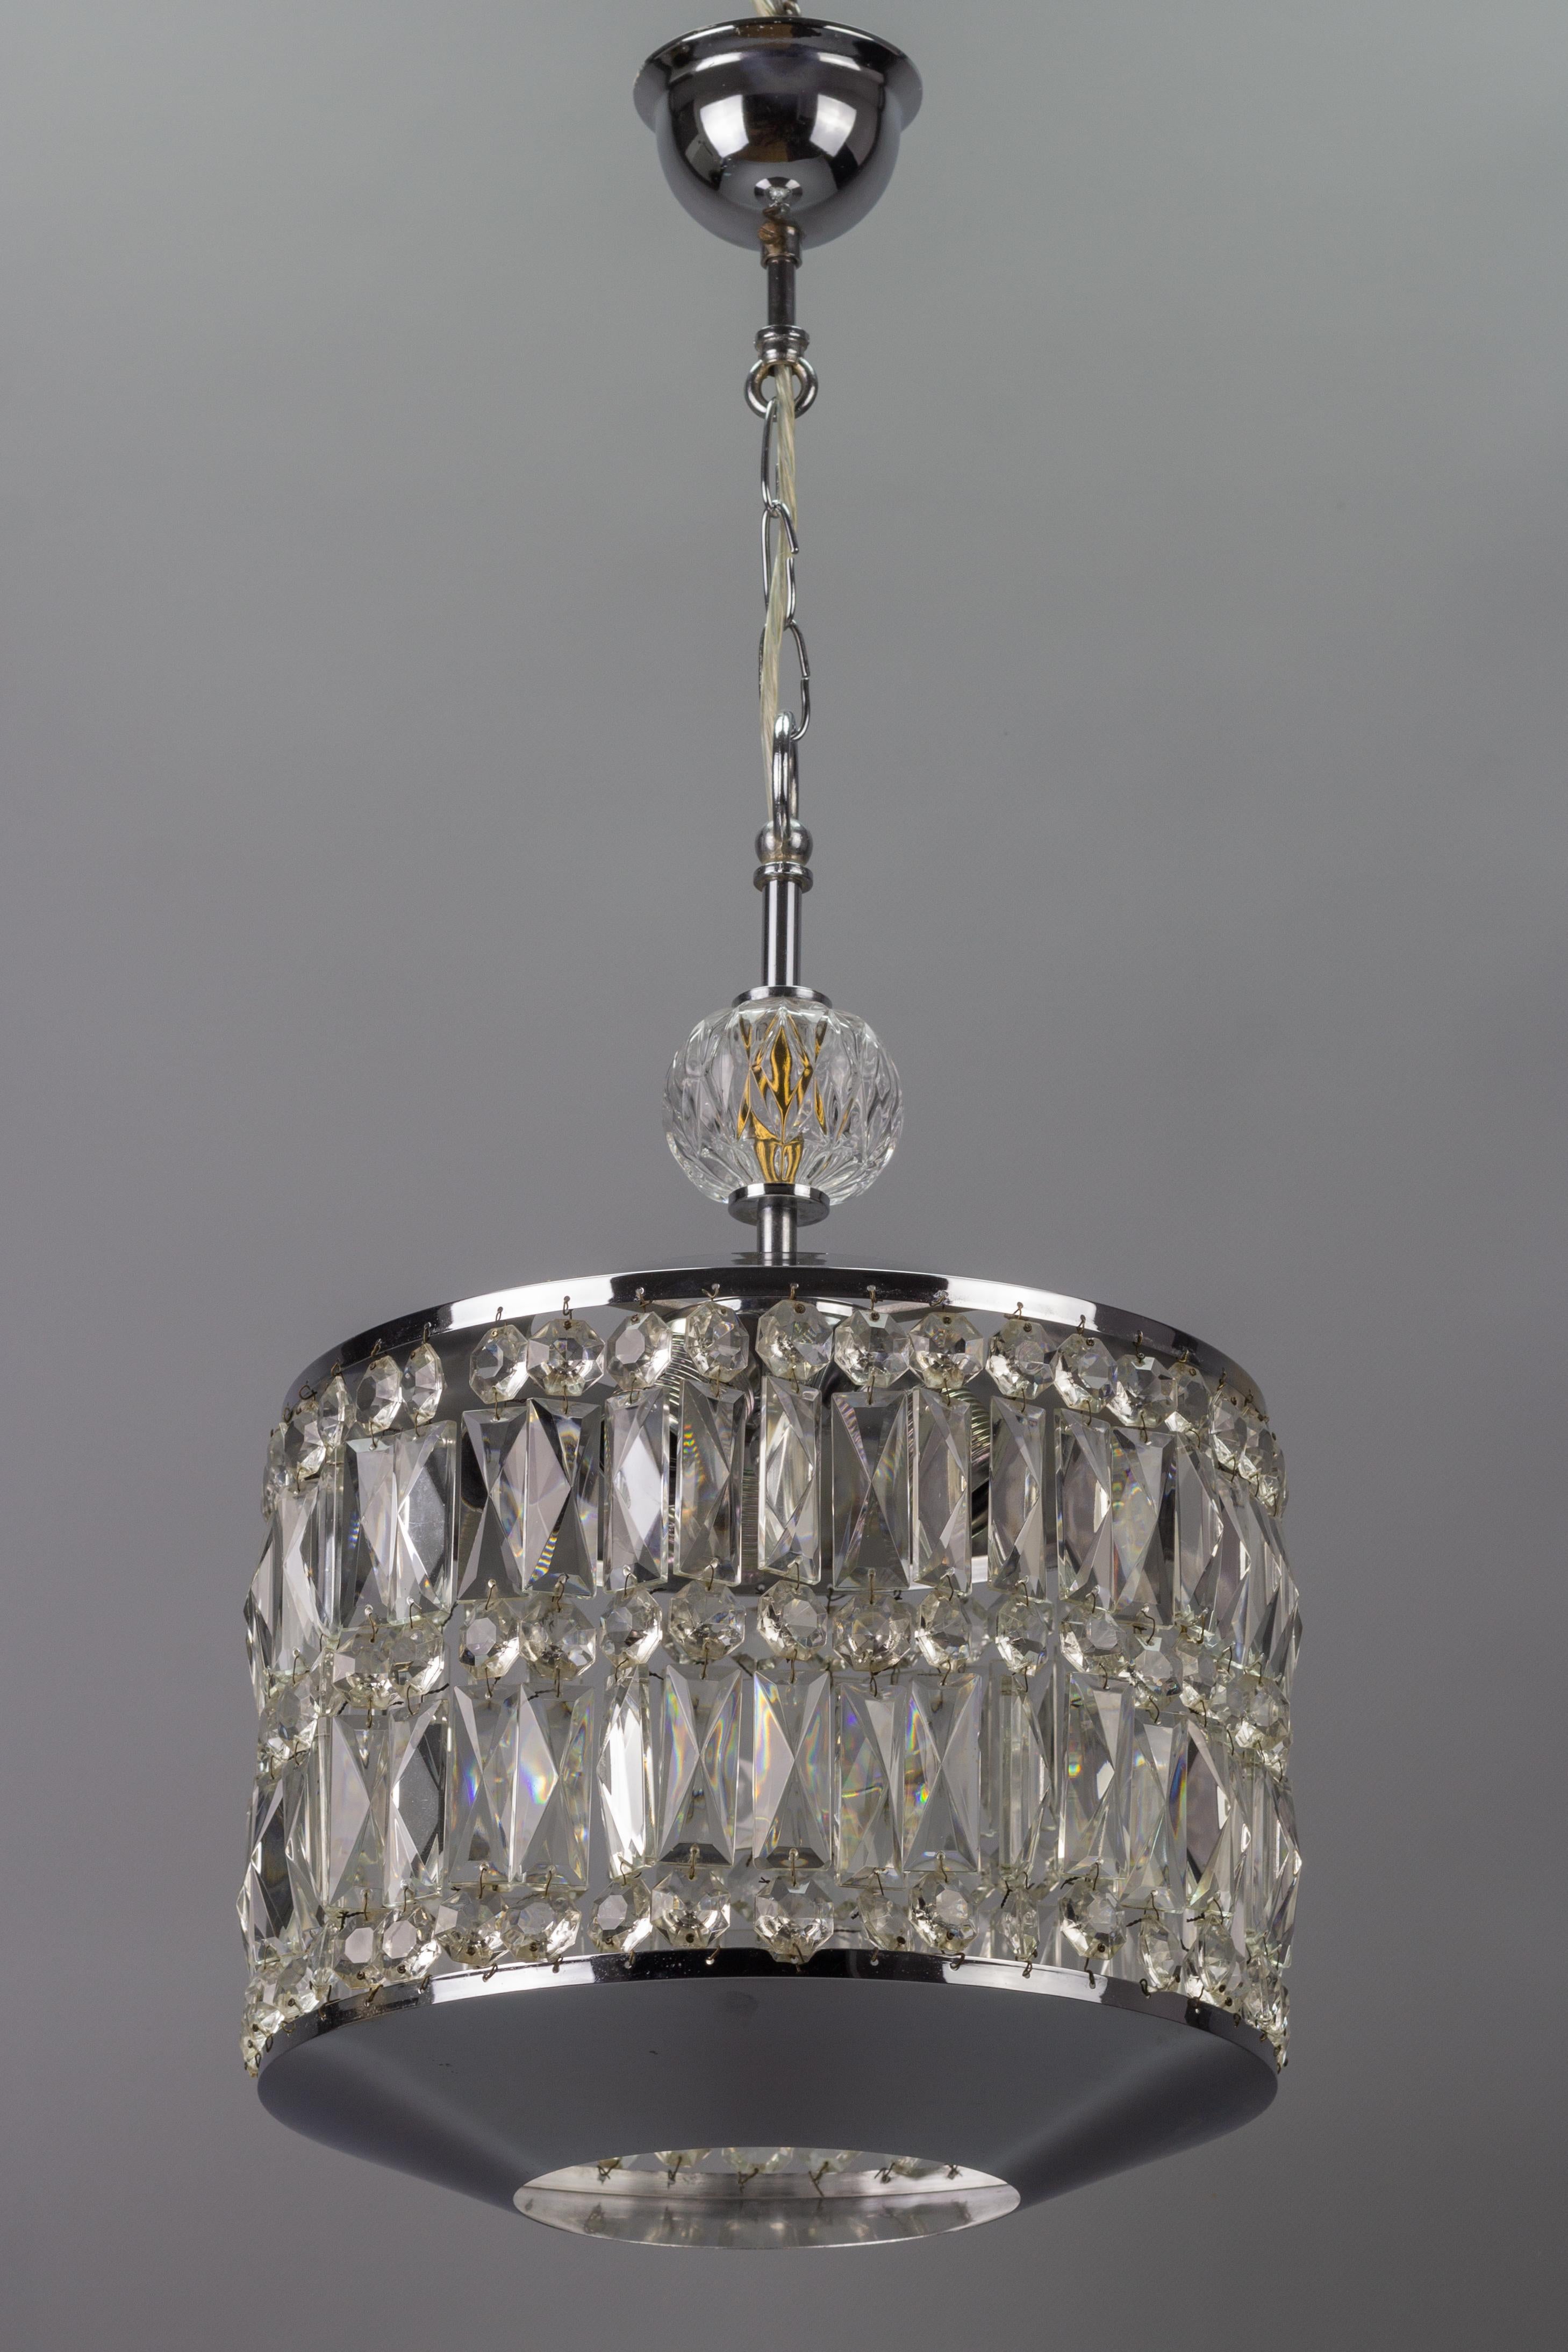 German Mid-Century Modern Crystal Glass and Chrome Chandelier or Pendant Light For Sale 10